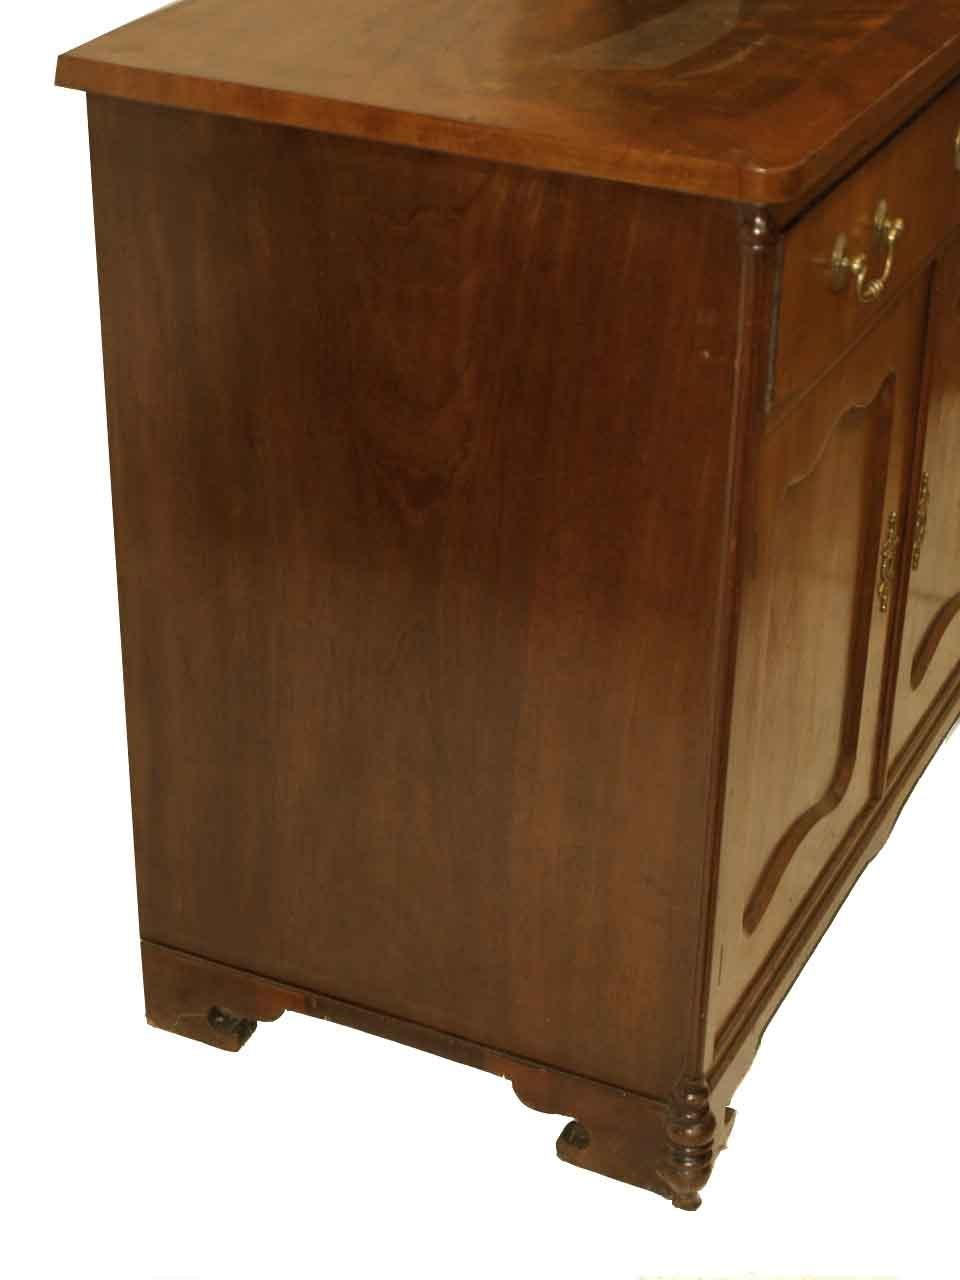 Continental mahogany one drawer cabinet, the top with book match flame mahogany veneer and cross banded edge above pull out brushing slide; single drawer with swan neck brass pulls over double doors with inset panels, interior with one shelf. The